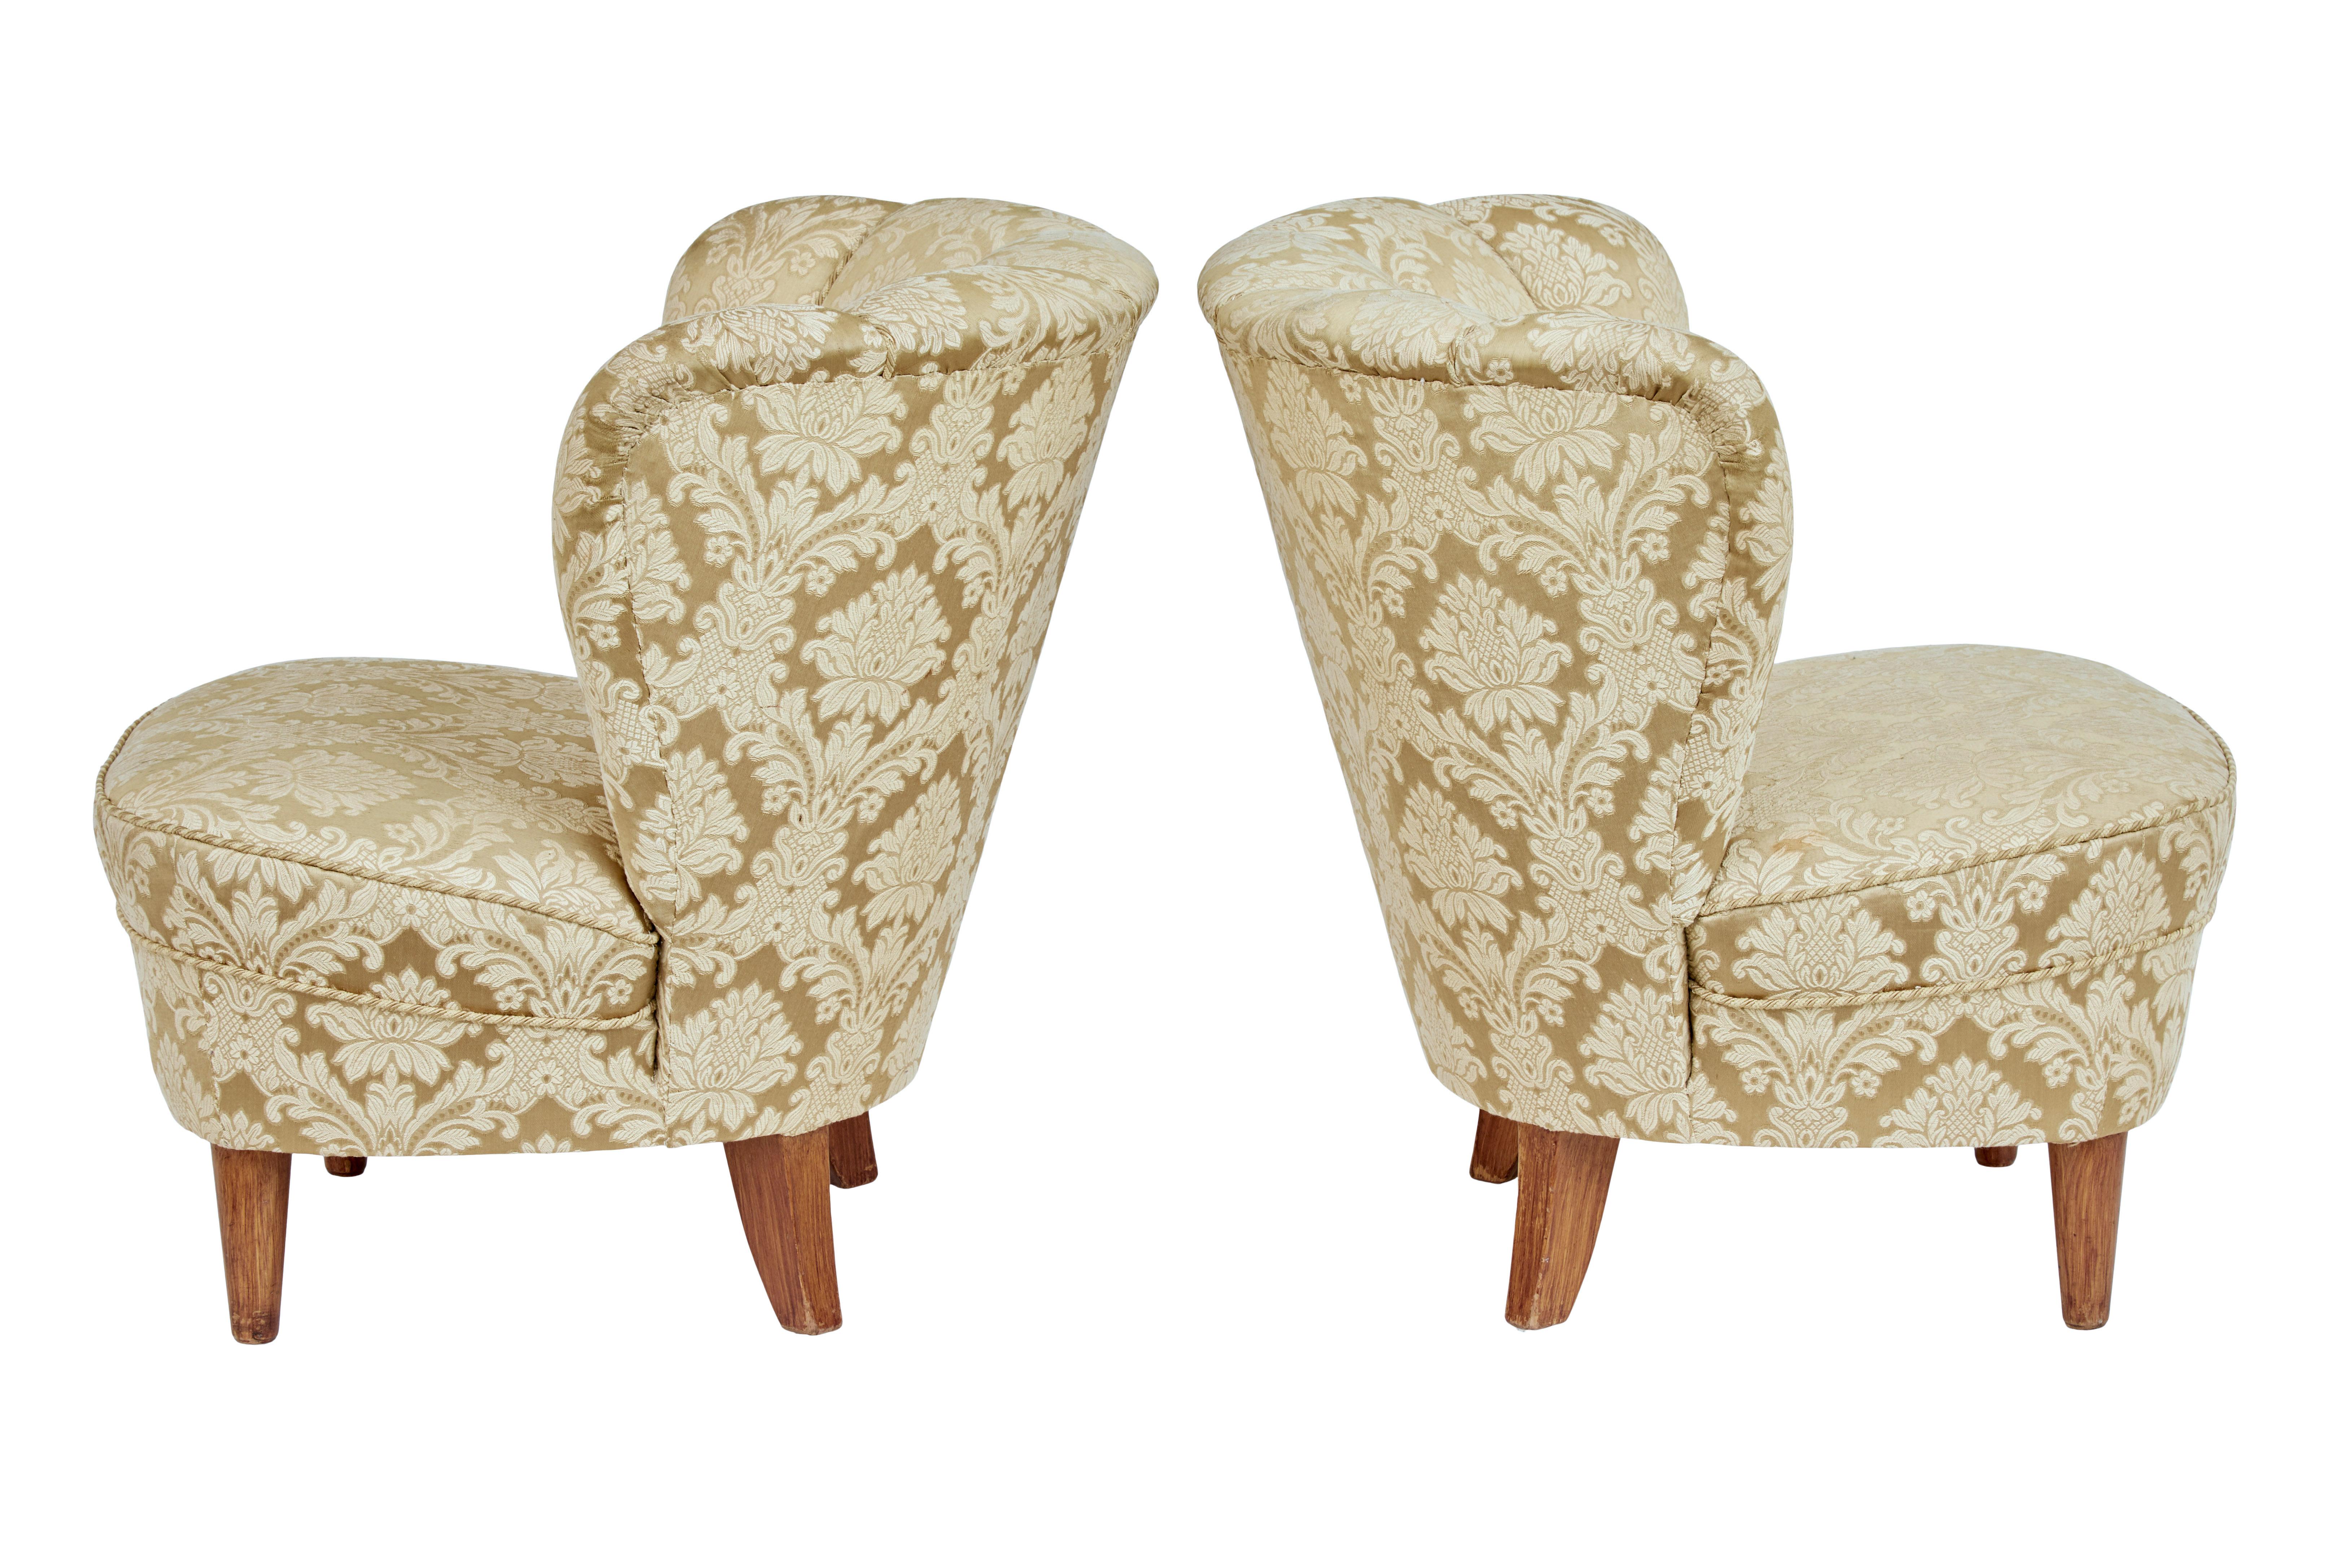 Upholstery 3-Piece Mid-20th Century Shell Back Living Room Suite